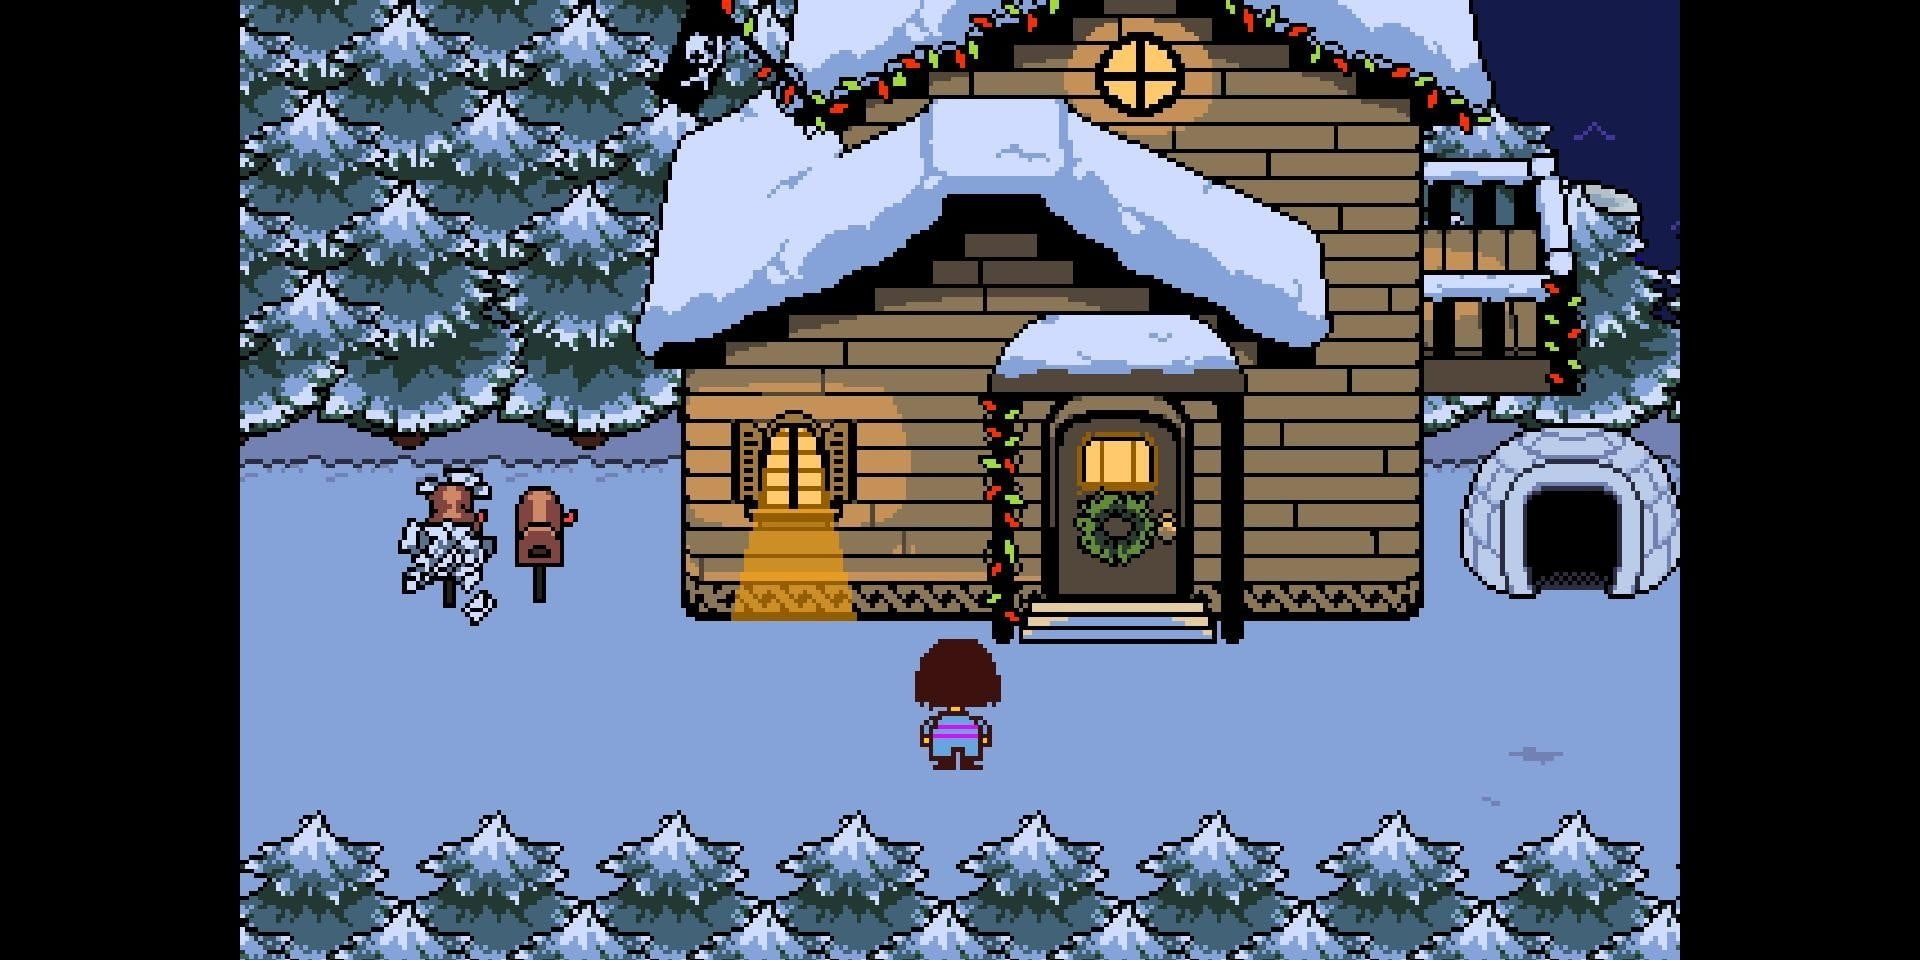 A screenshot the child standing in front of a snow-covered house in Undertale